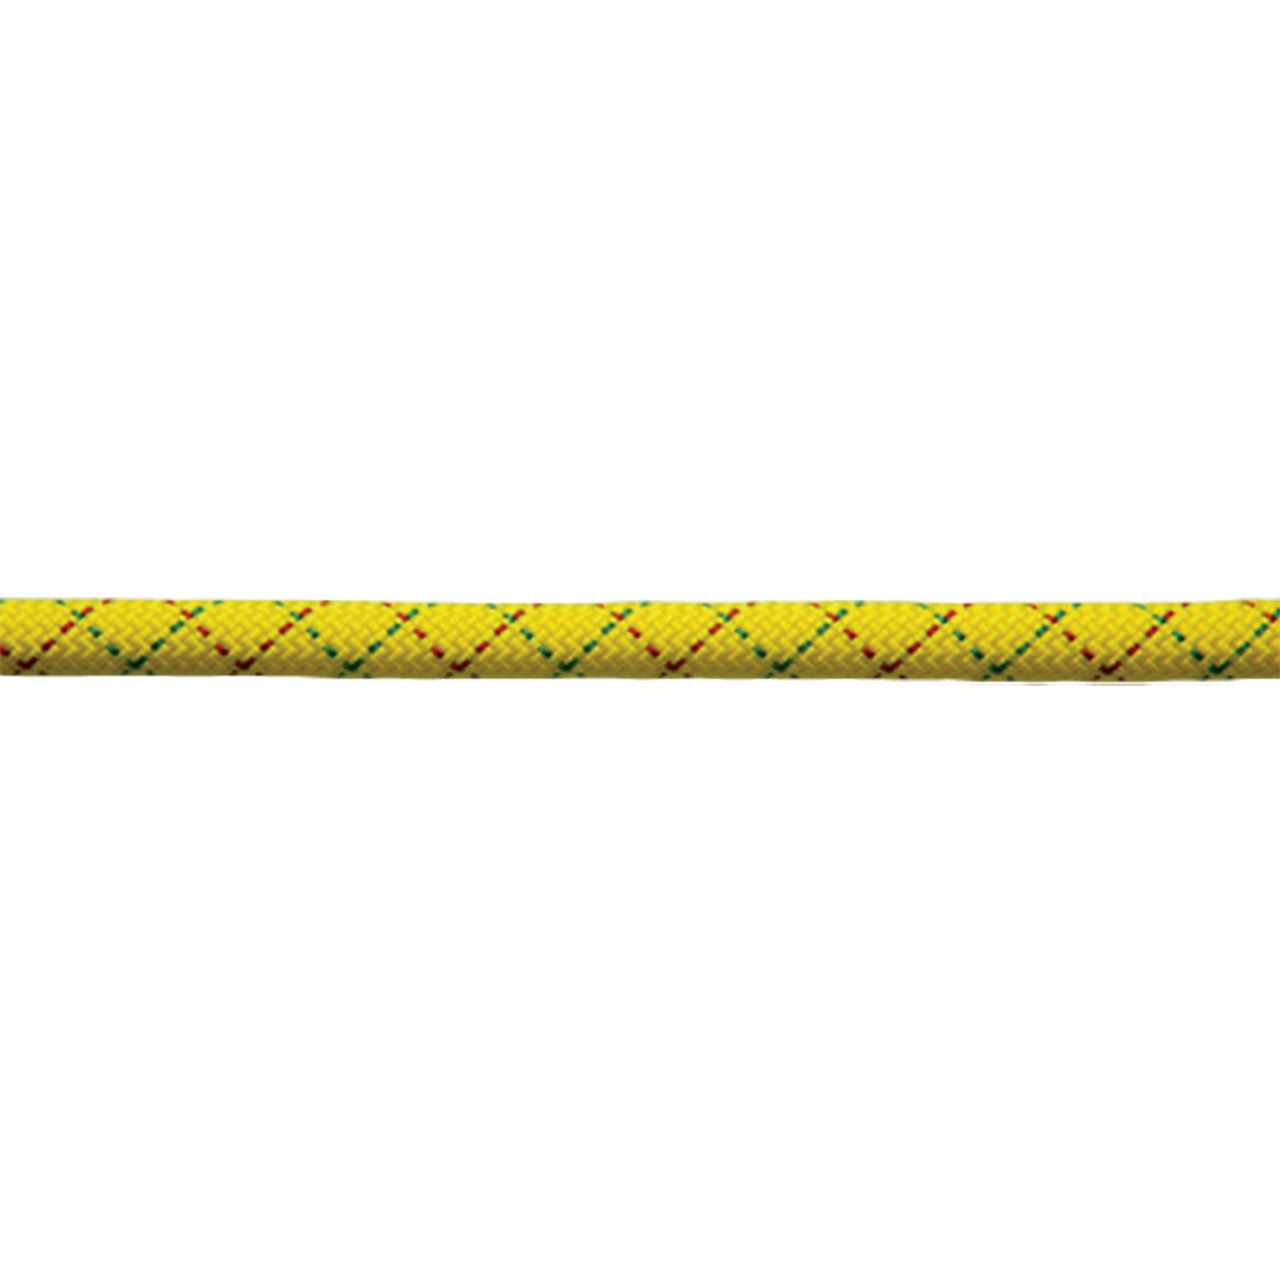 Rope   Free Images At Clker Com   Vector Clip Art Online Royalty Free